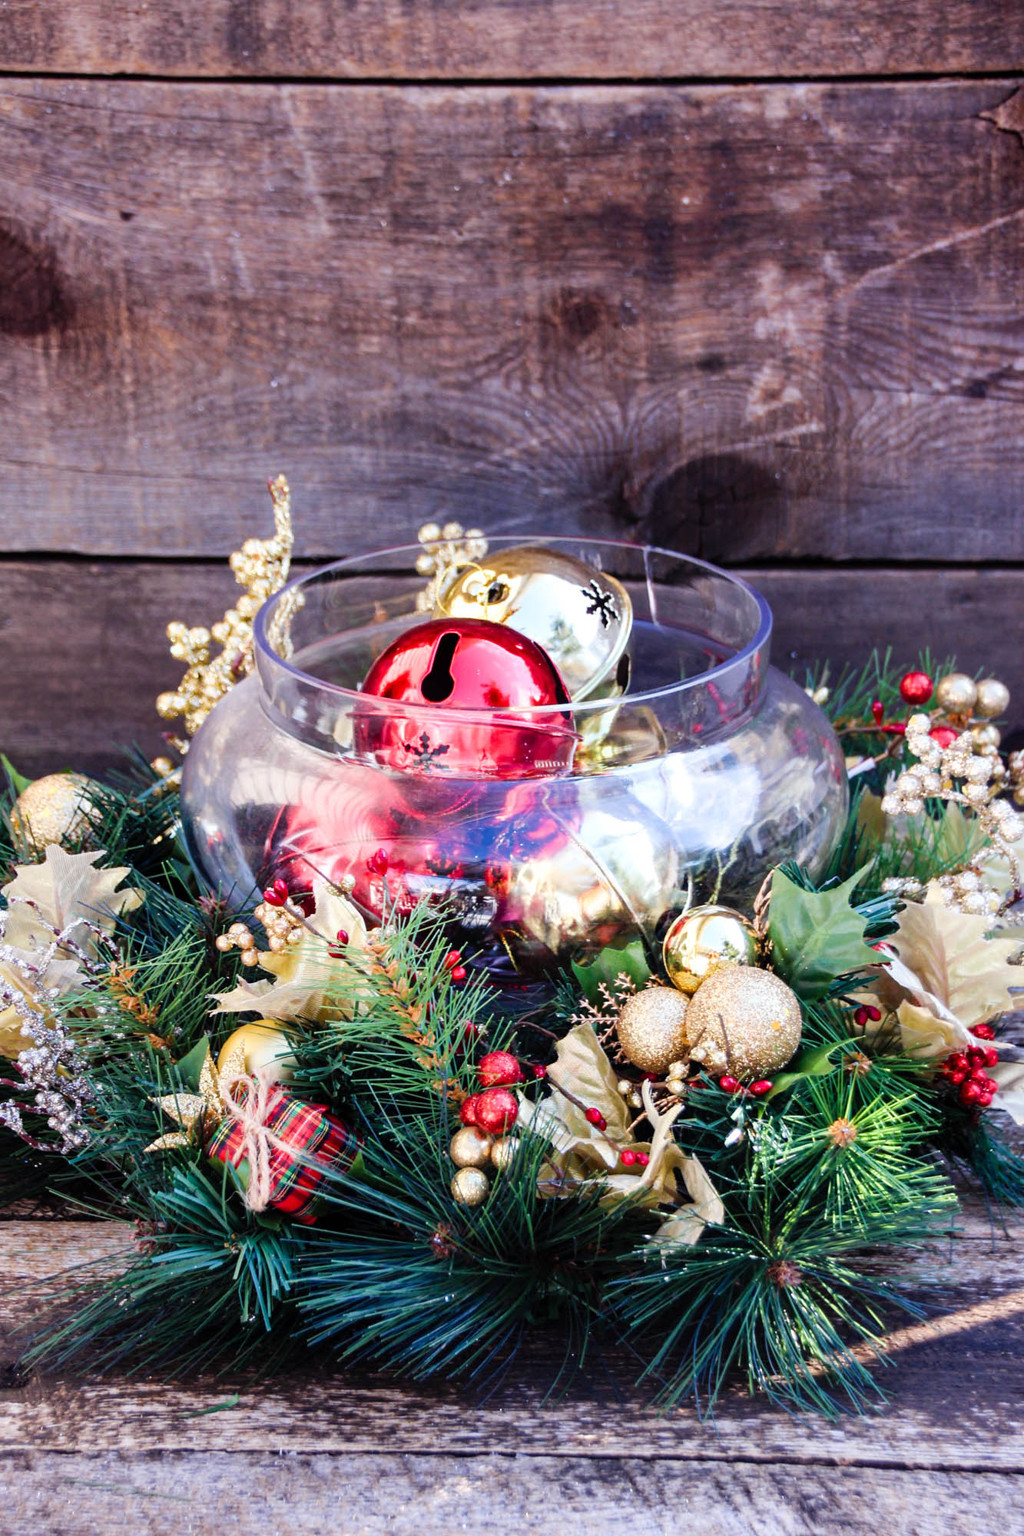 Christmas Table Decorations To Make
 Easy DIY Holiday Centerpiece A super simple project in